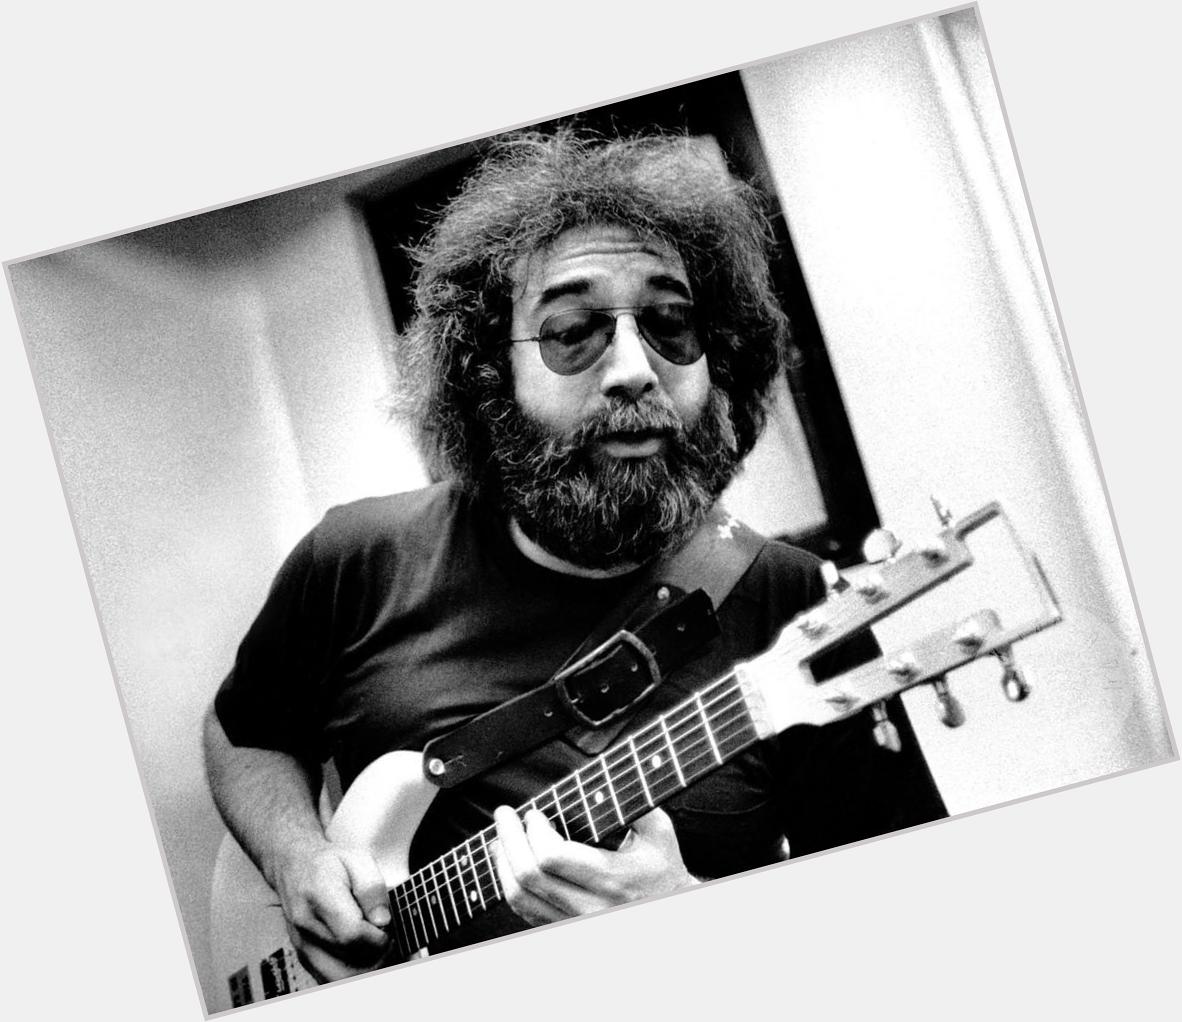 Happy Birthday to Jerry Garcia, who would have turned 73 today! 